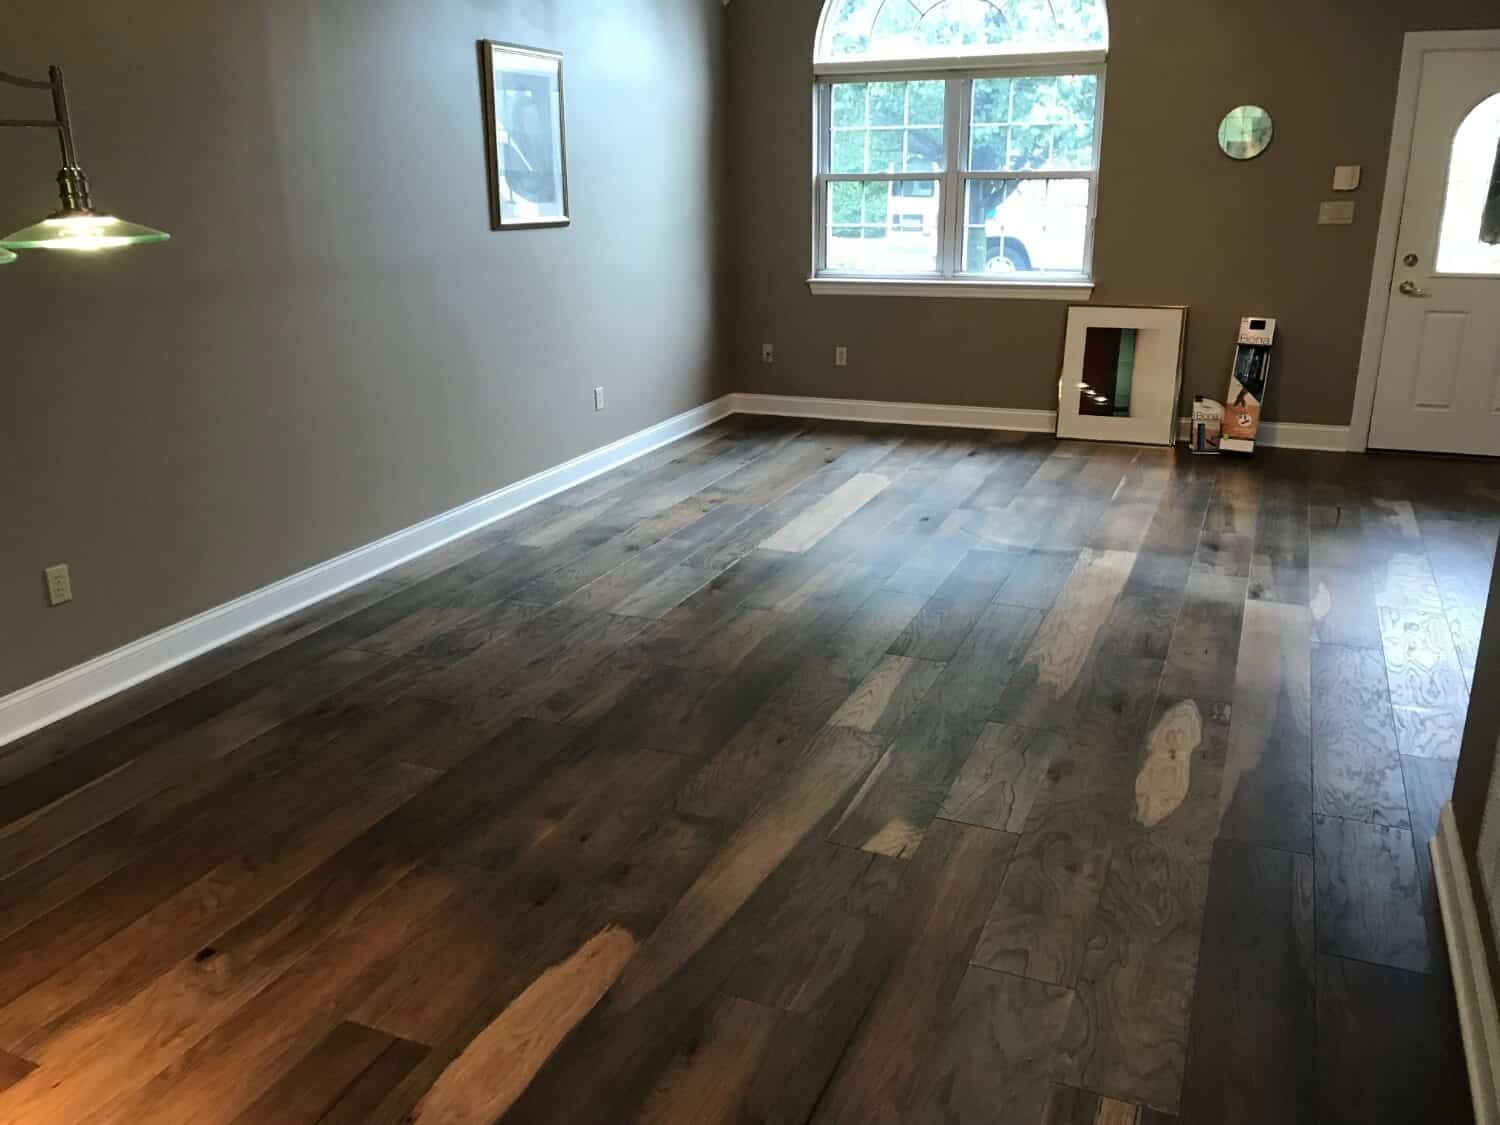 Dark brown and caramel colored flooring in a large empty room